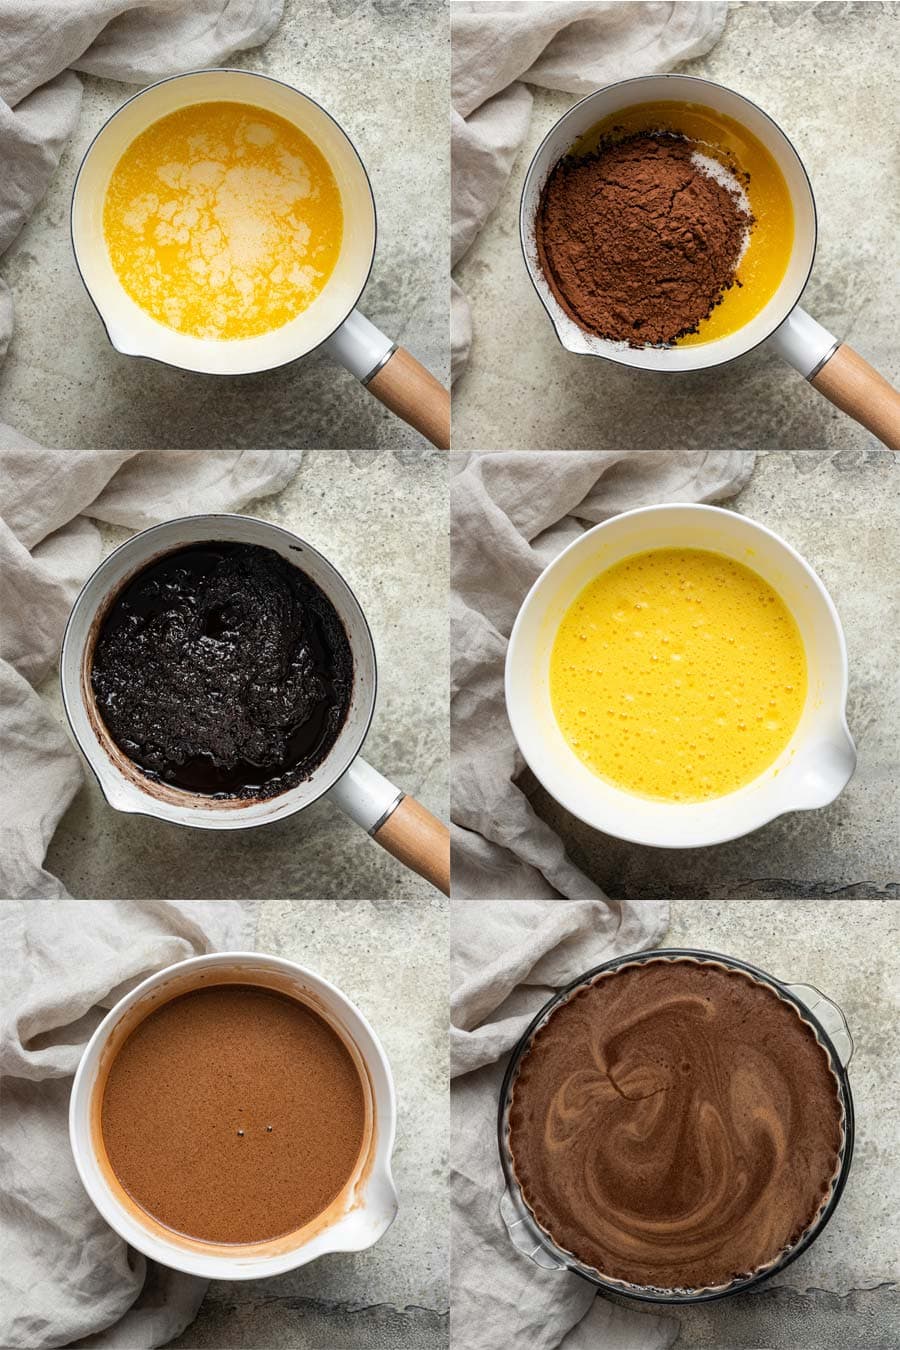 step by step photos showing how to whisk all the ingredients together to make chocolate buttermilk pie